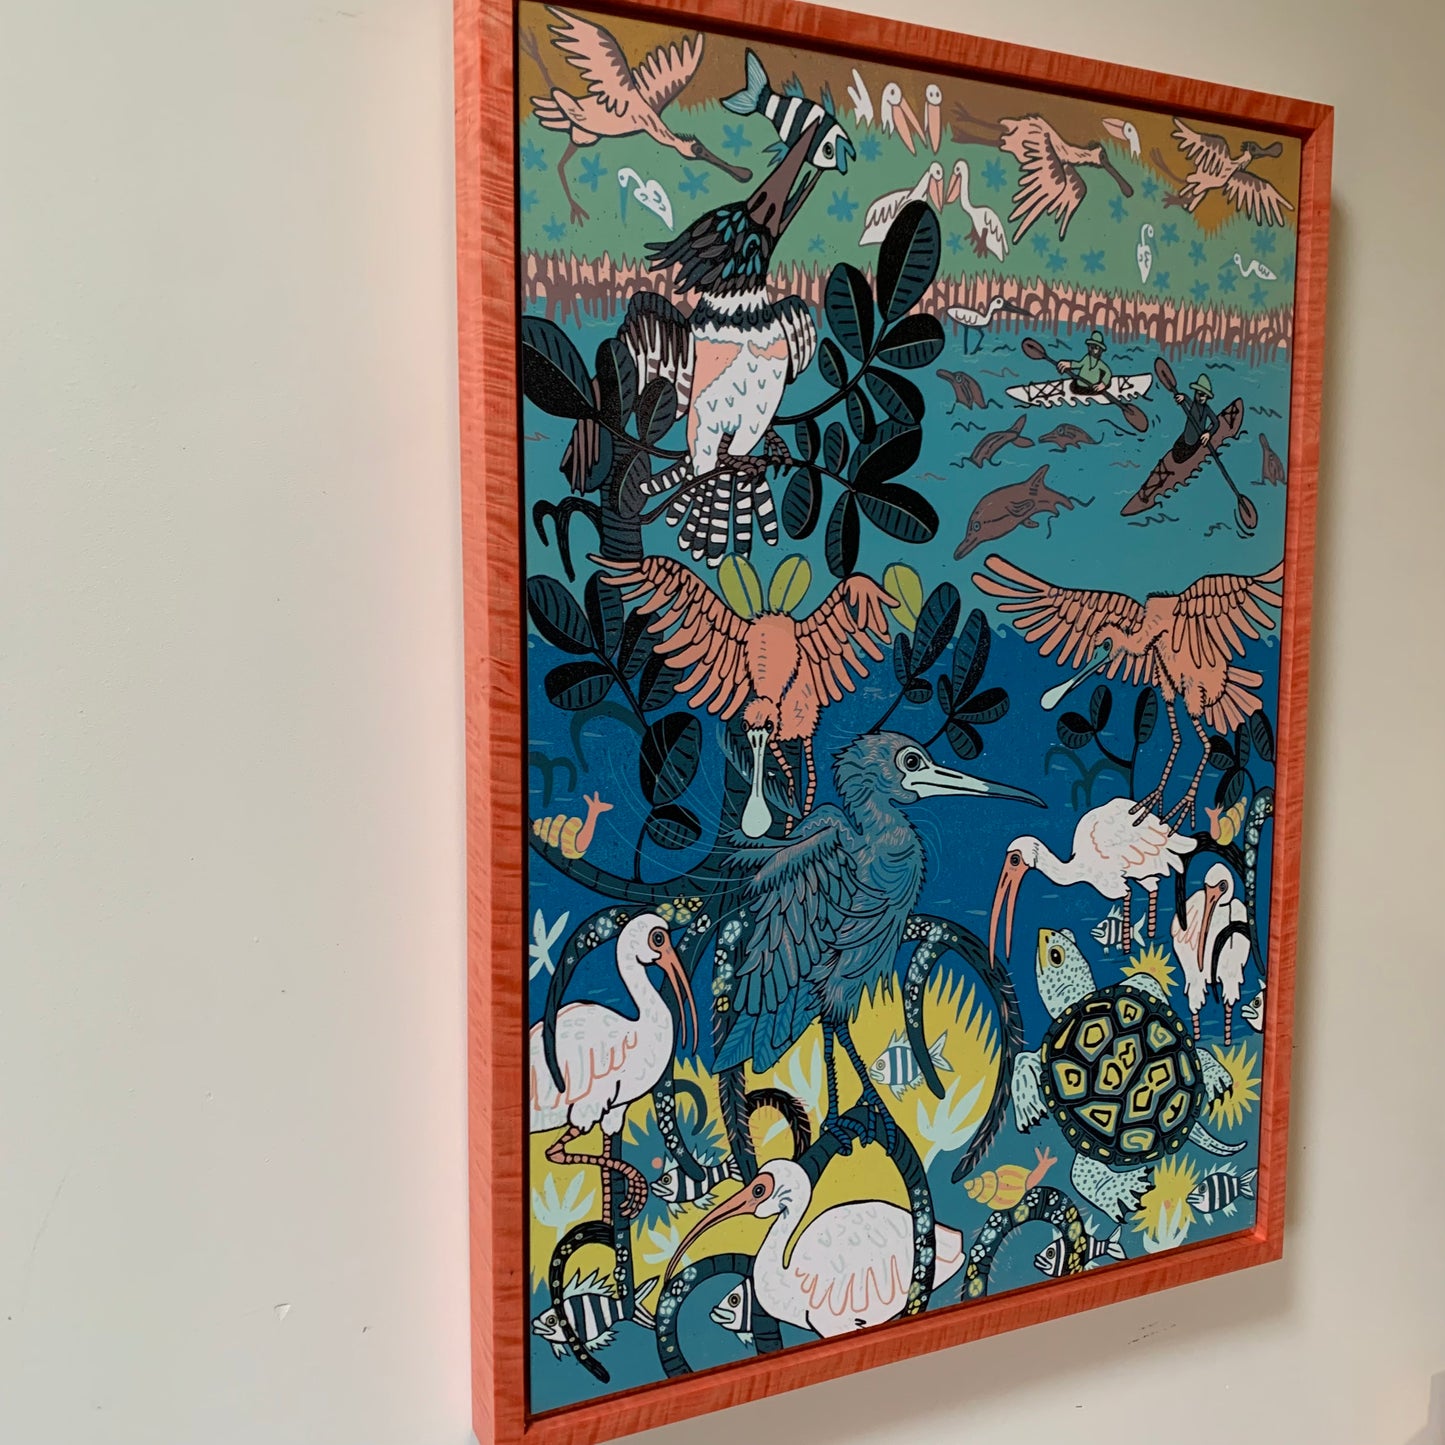 Please allow 8 weeks for delivery—Mangrove Homestead woodcut framed in pink